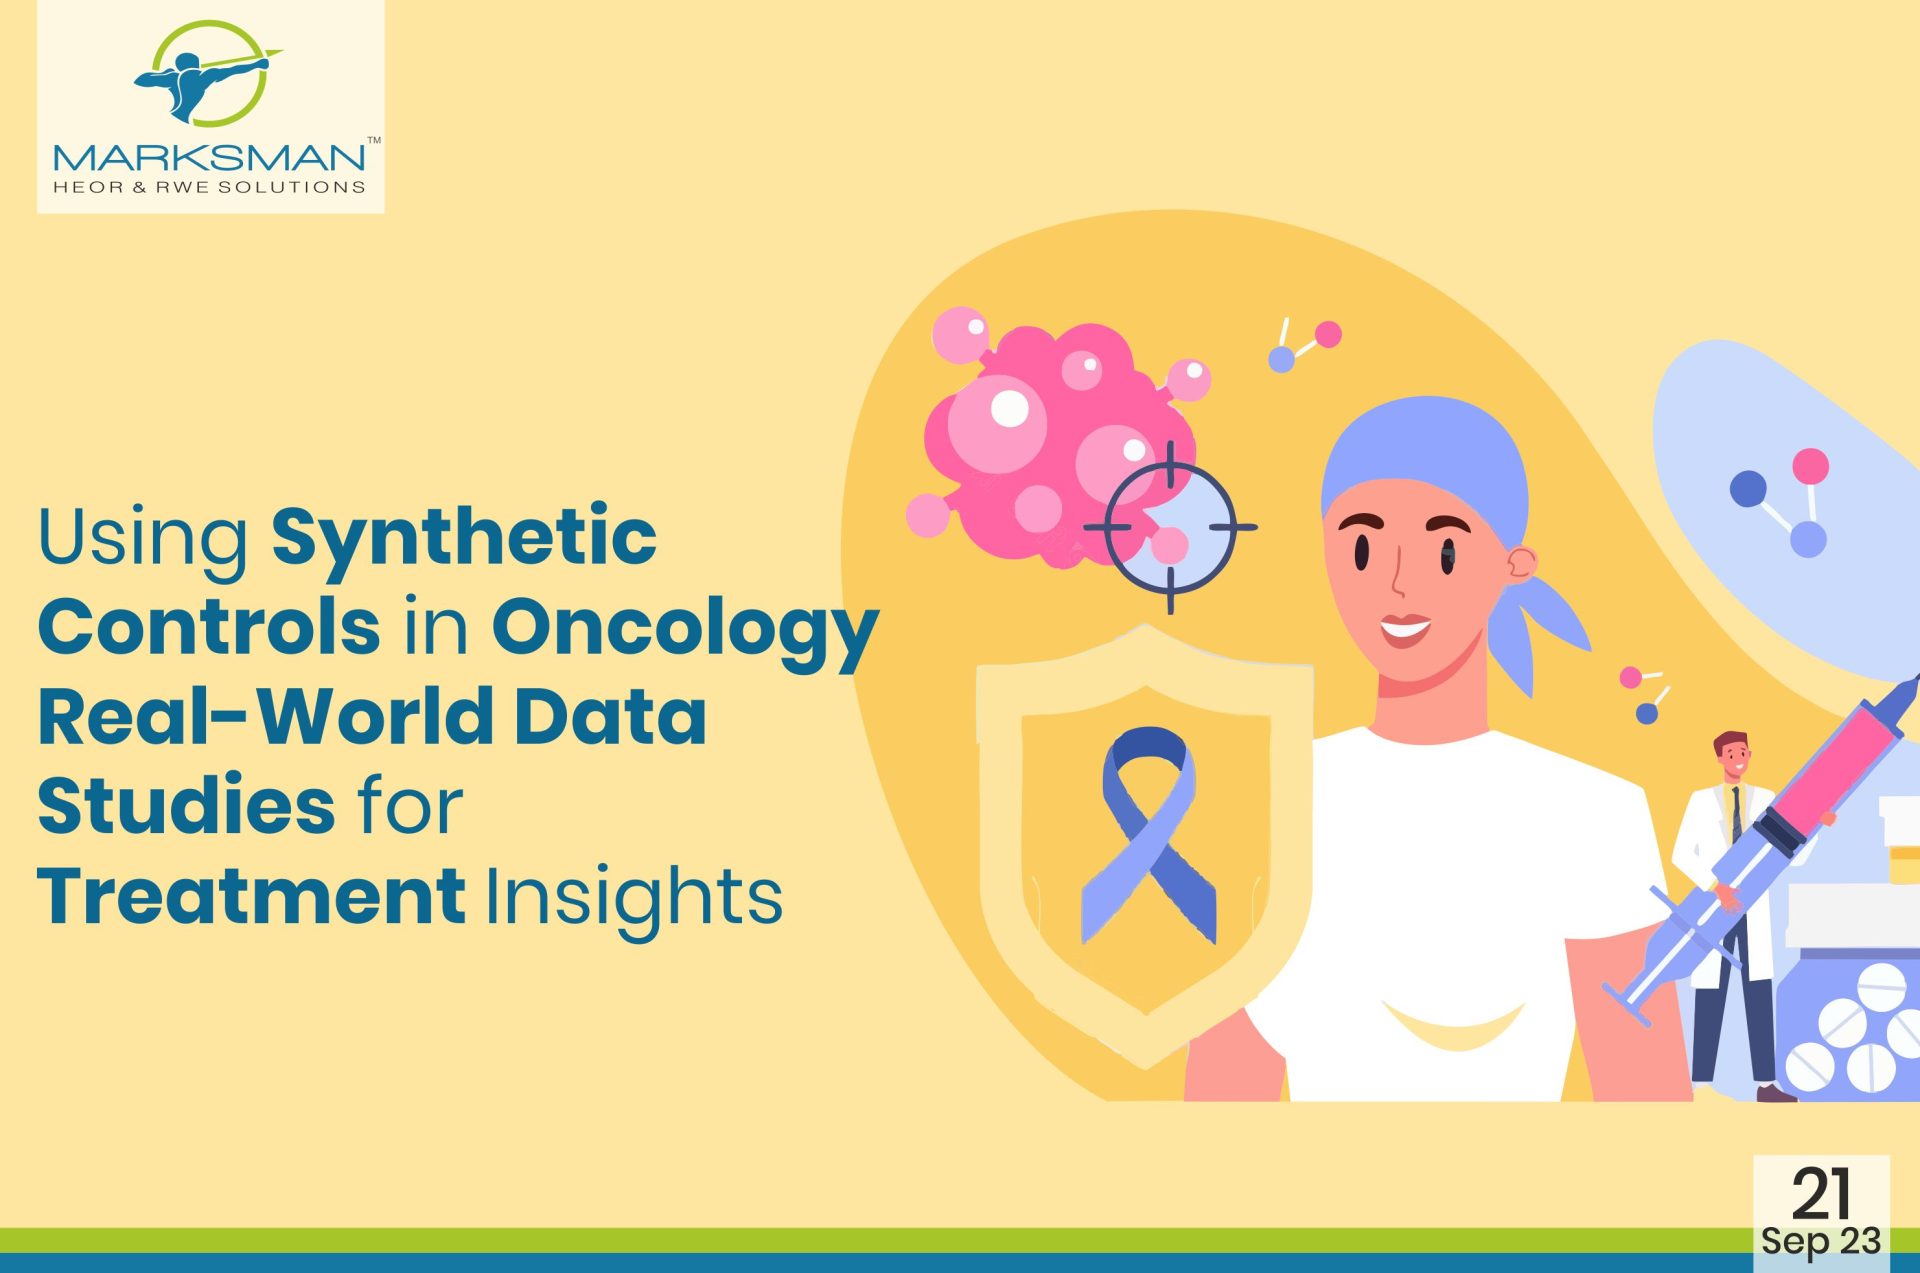 Using Synthetic Controls in Oncology Real-World Data Studies for Treatment Insights